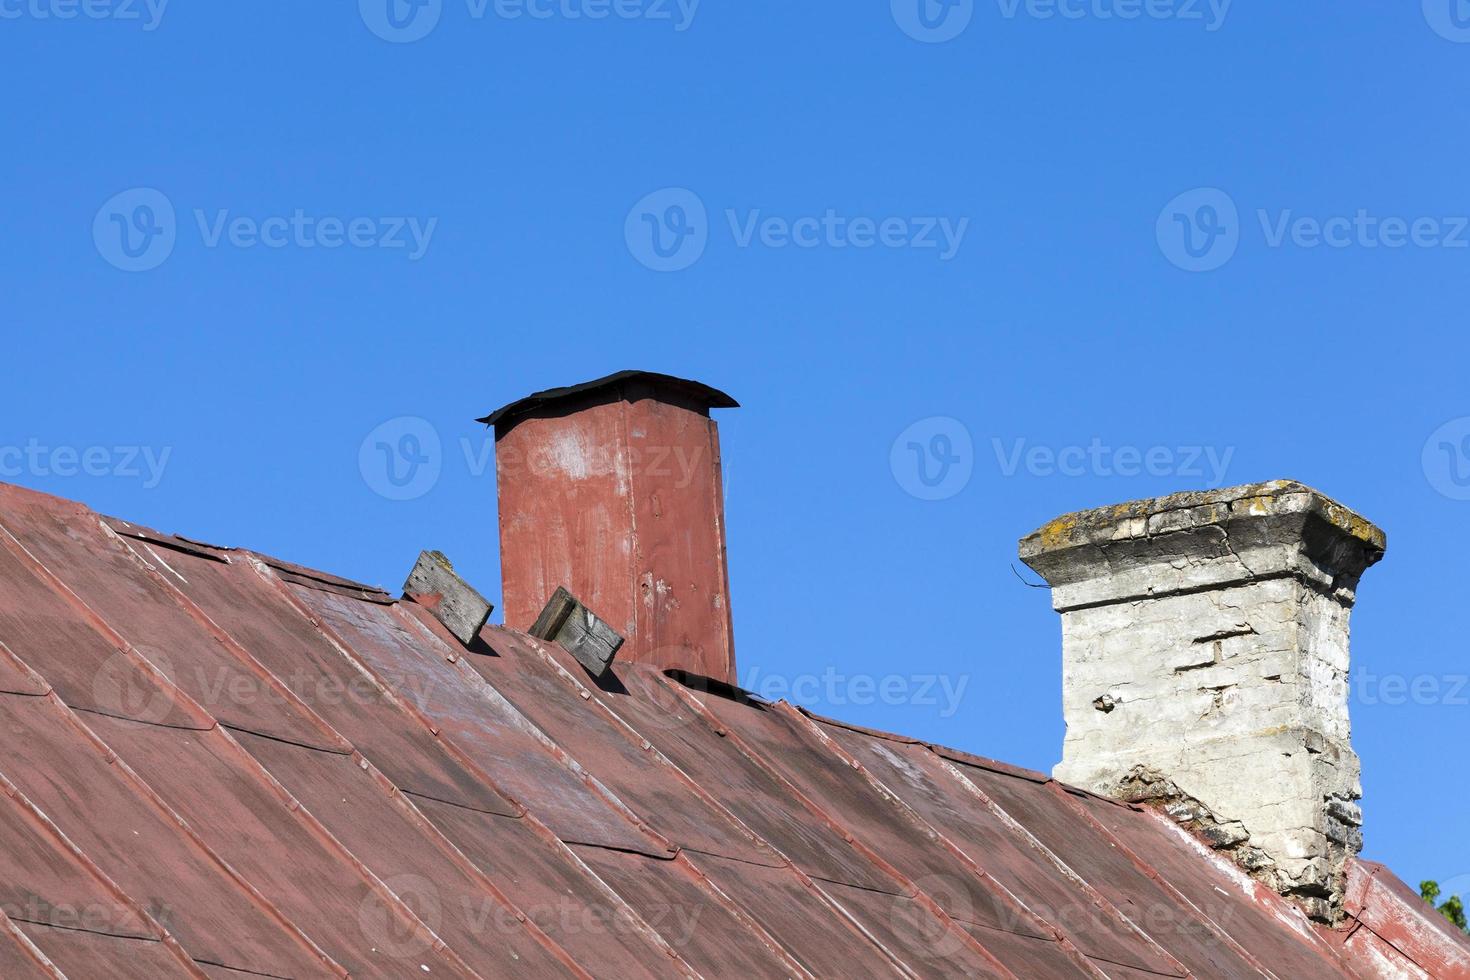 The old roof photo